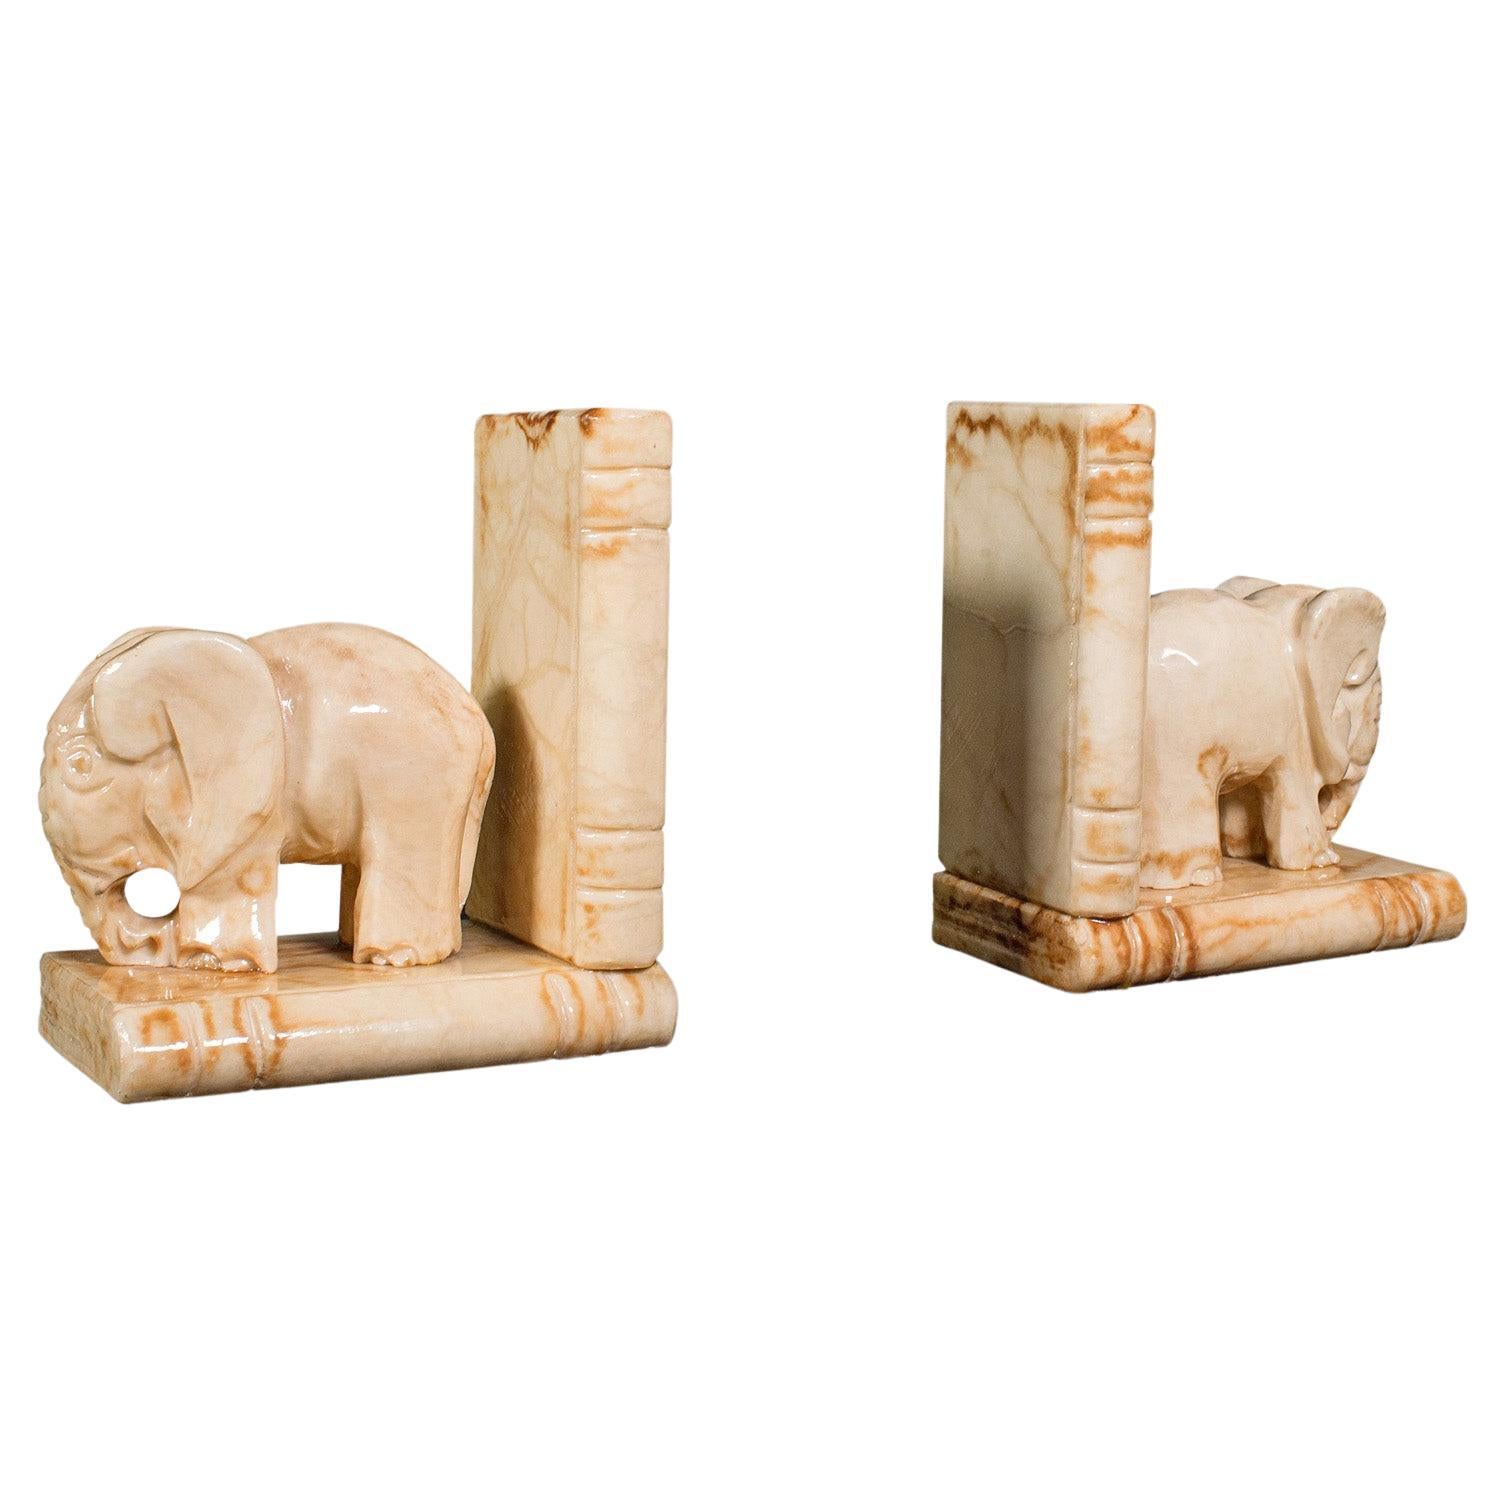 Pair of Antique Elephant Bookends, African, Milk Onyx, Book Rest, Victorian